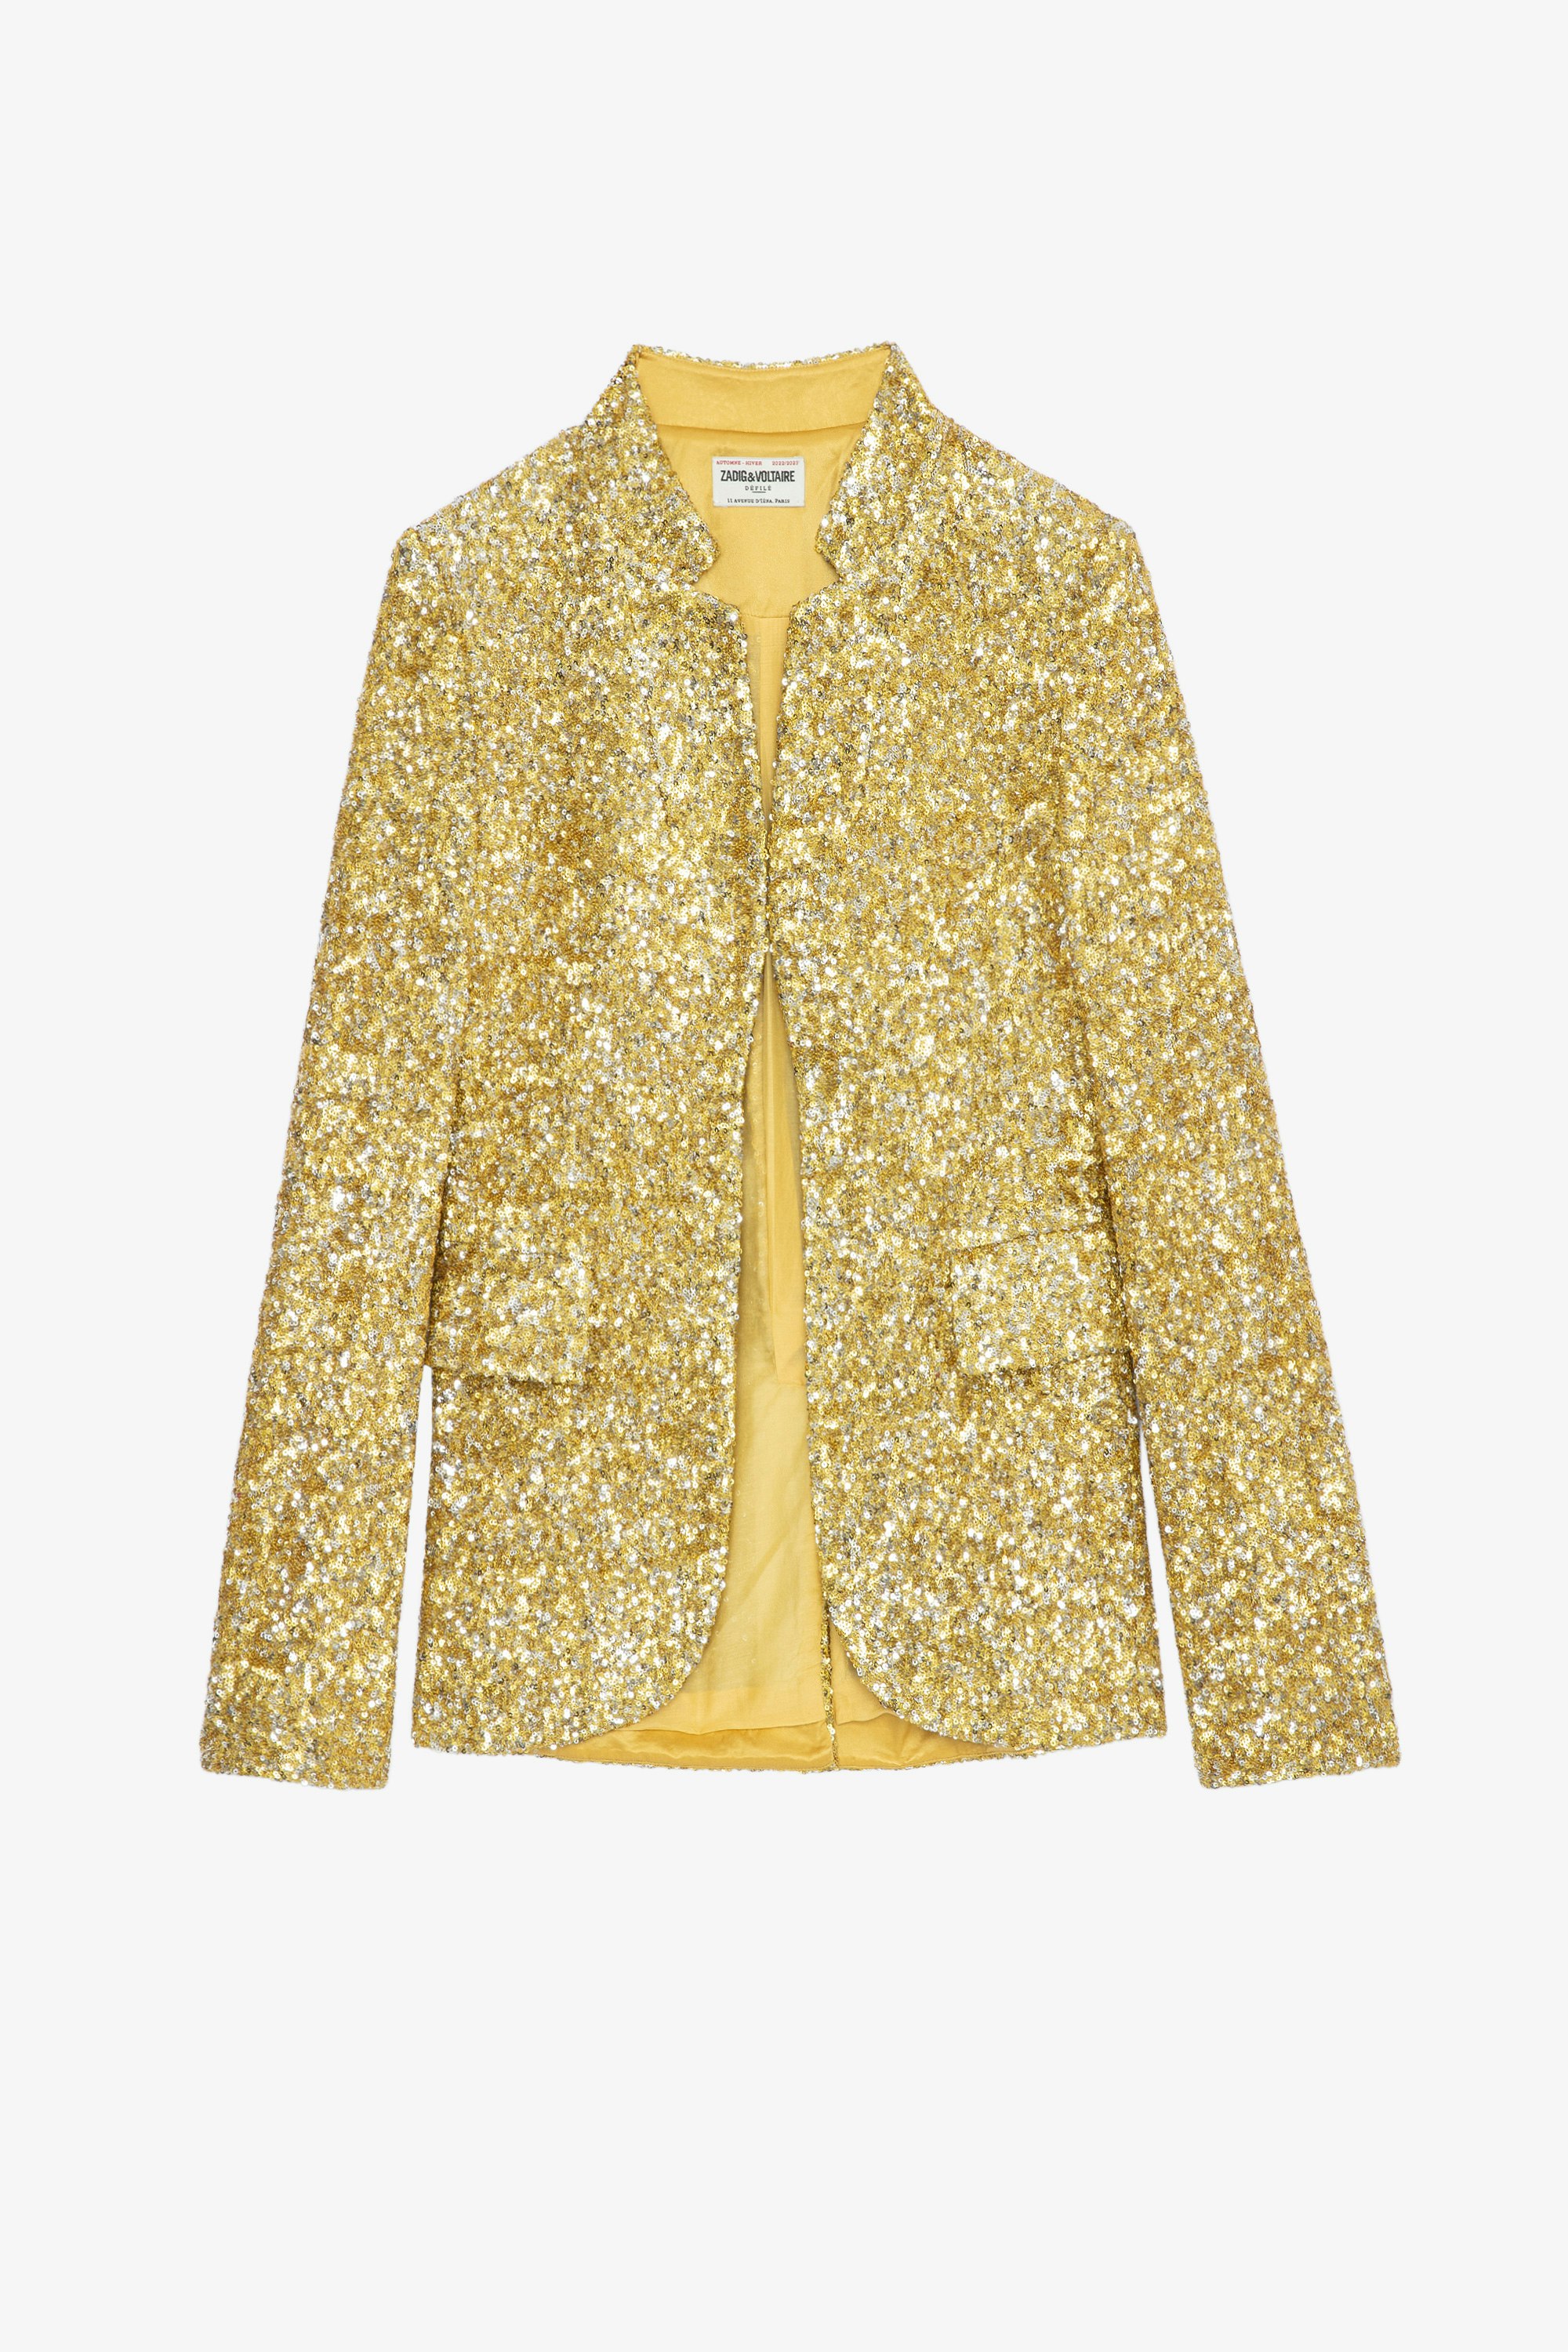 Very Sequins Jacket Women’s structured jacket with gold sequins 